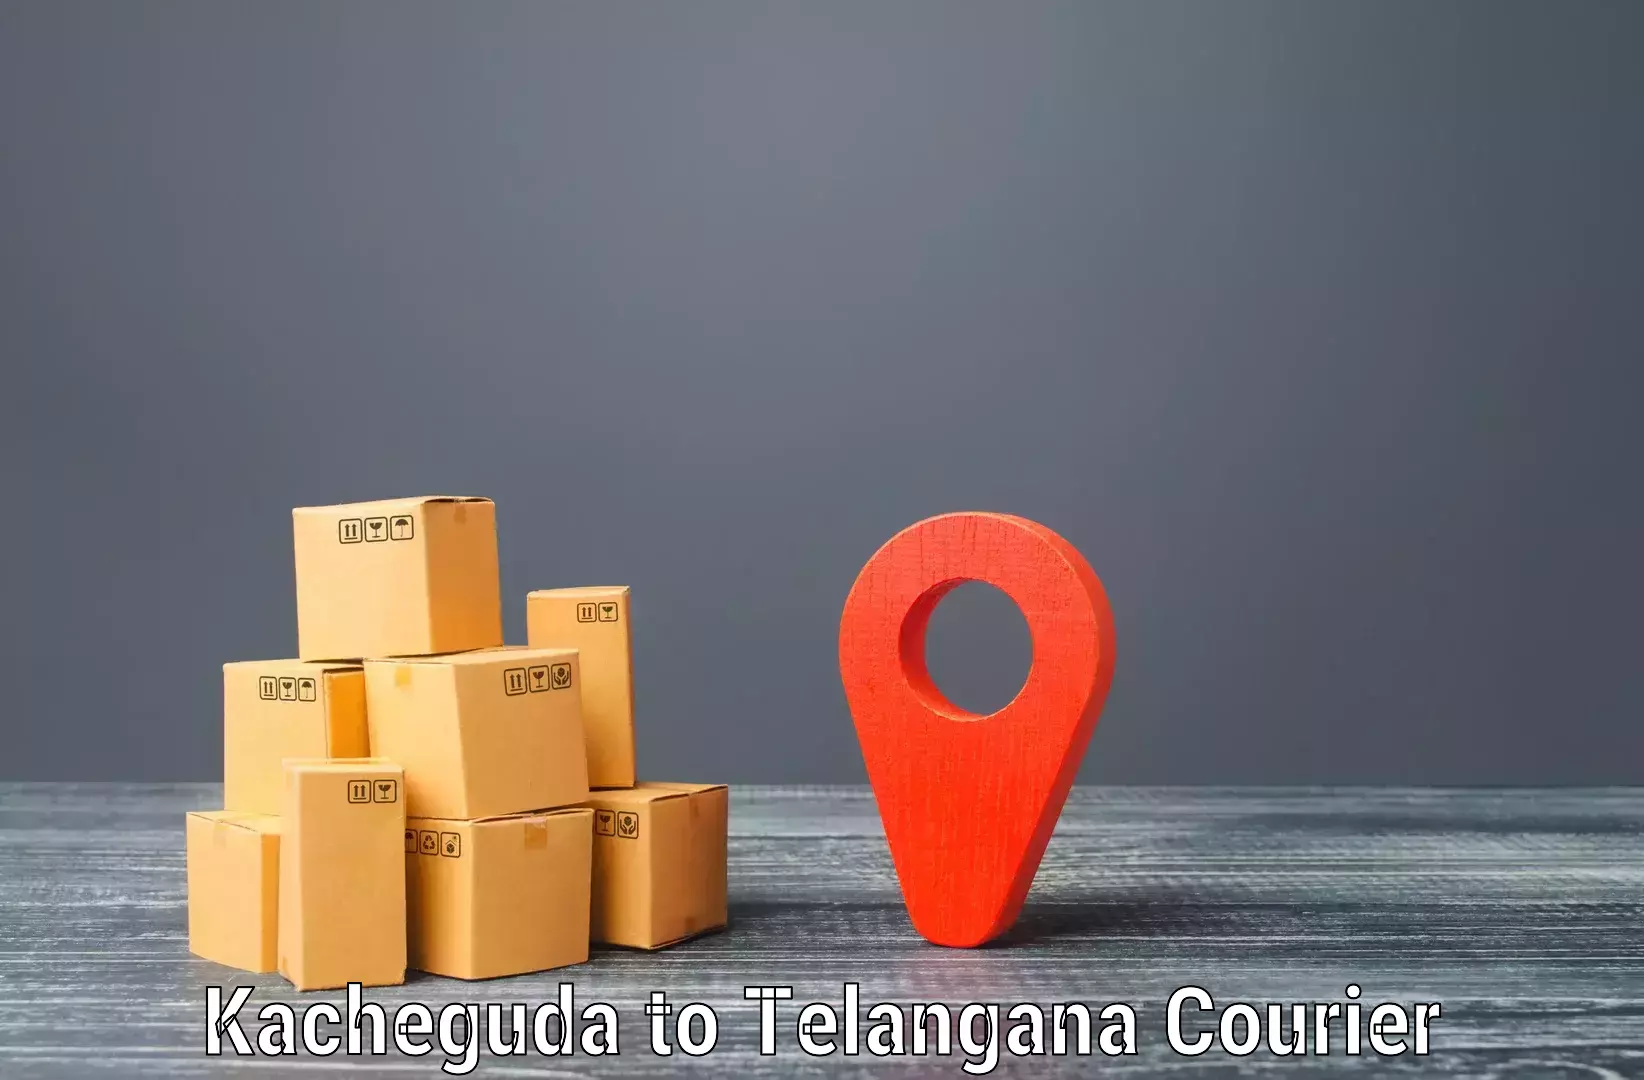 Same-day delivery options in Kacheguda to Bachupally